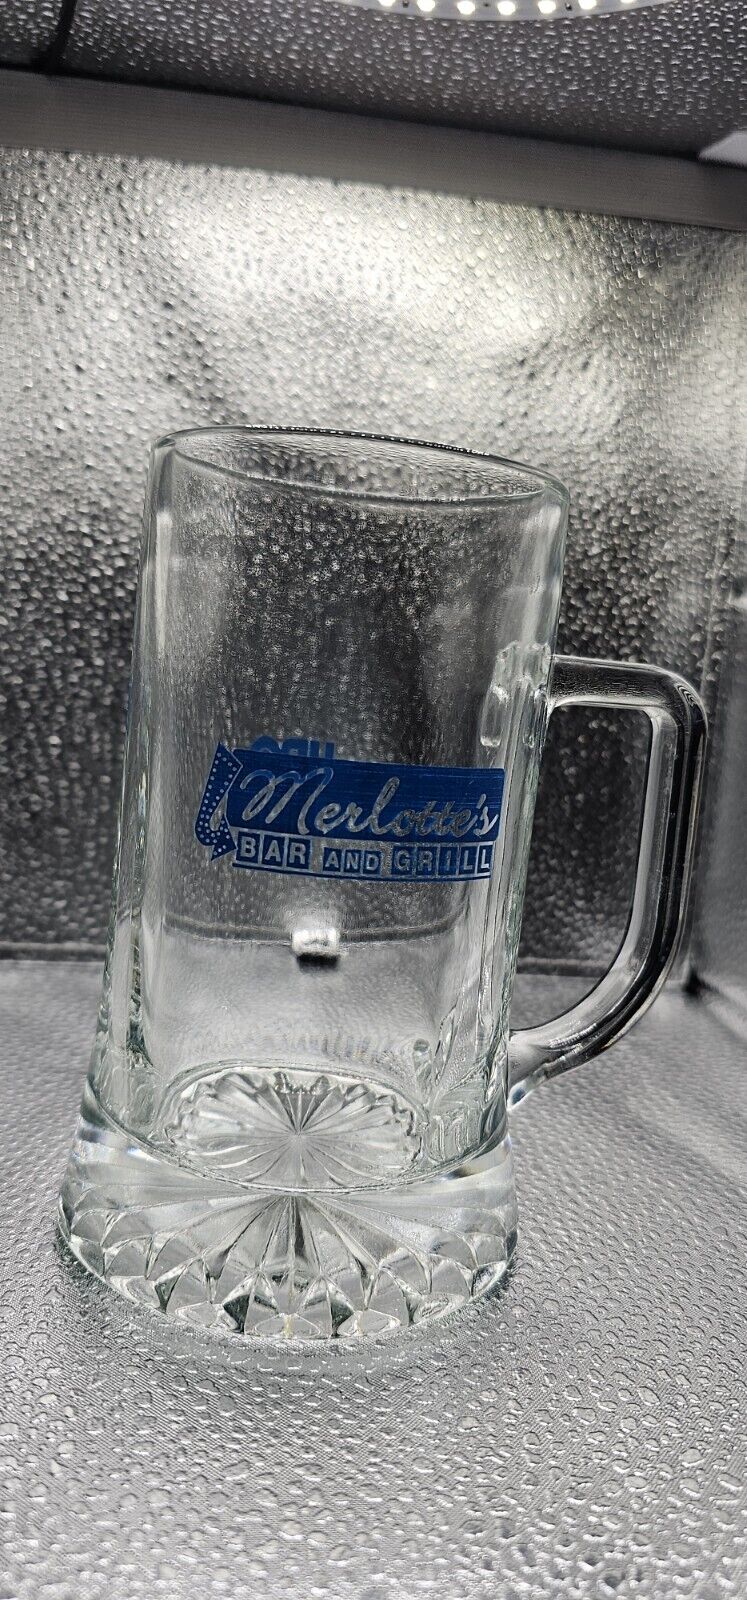 Merlotte's Bar and Grill Glass Beer Mug True Blood HBO LOGO Very RARE